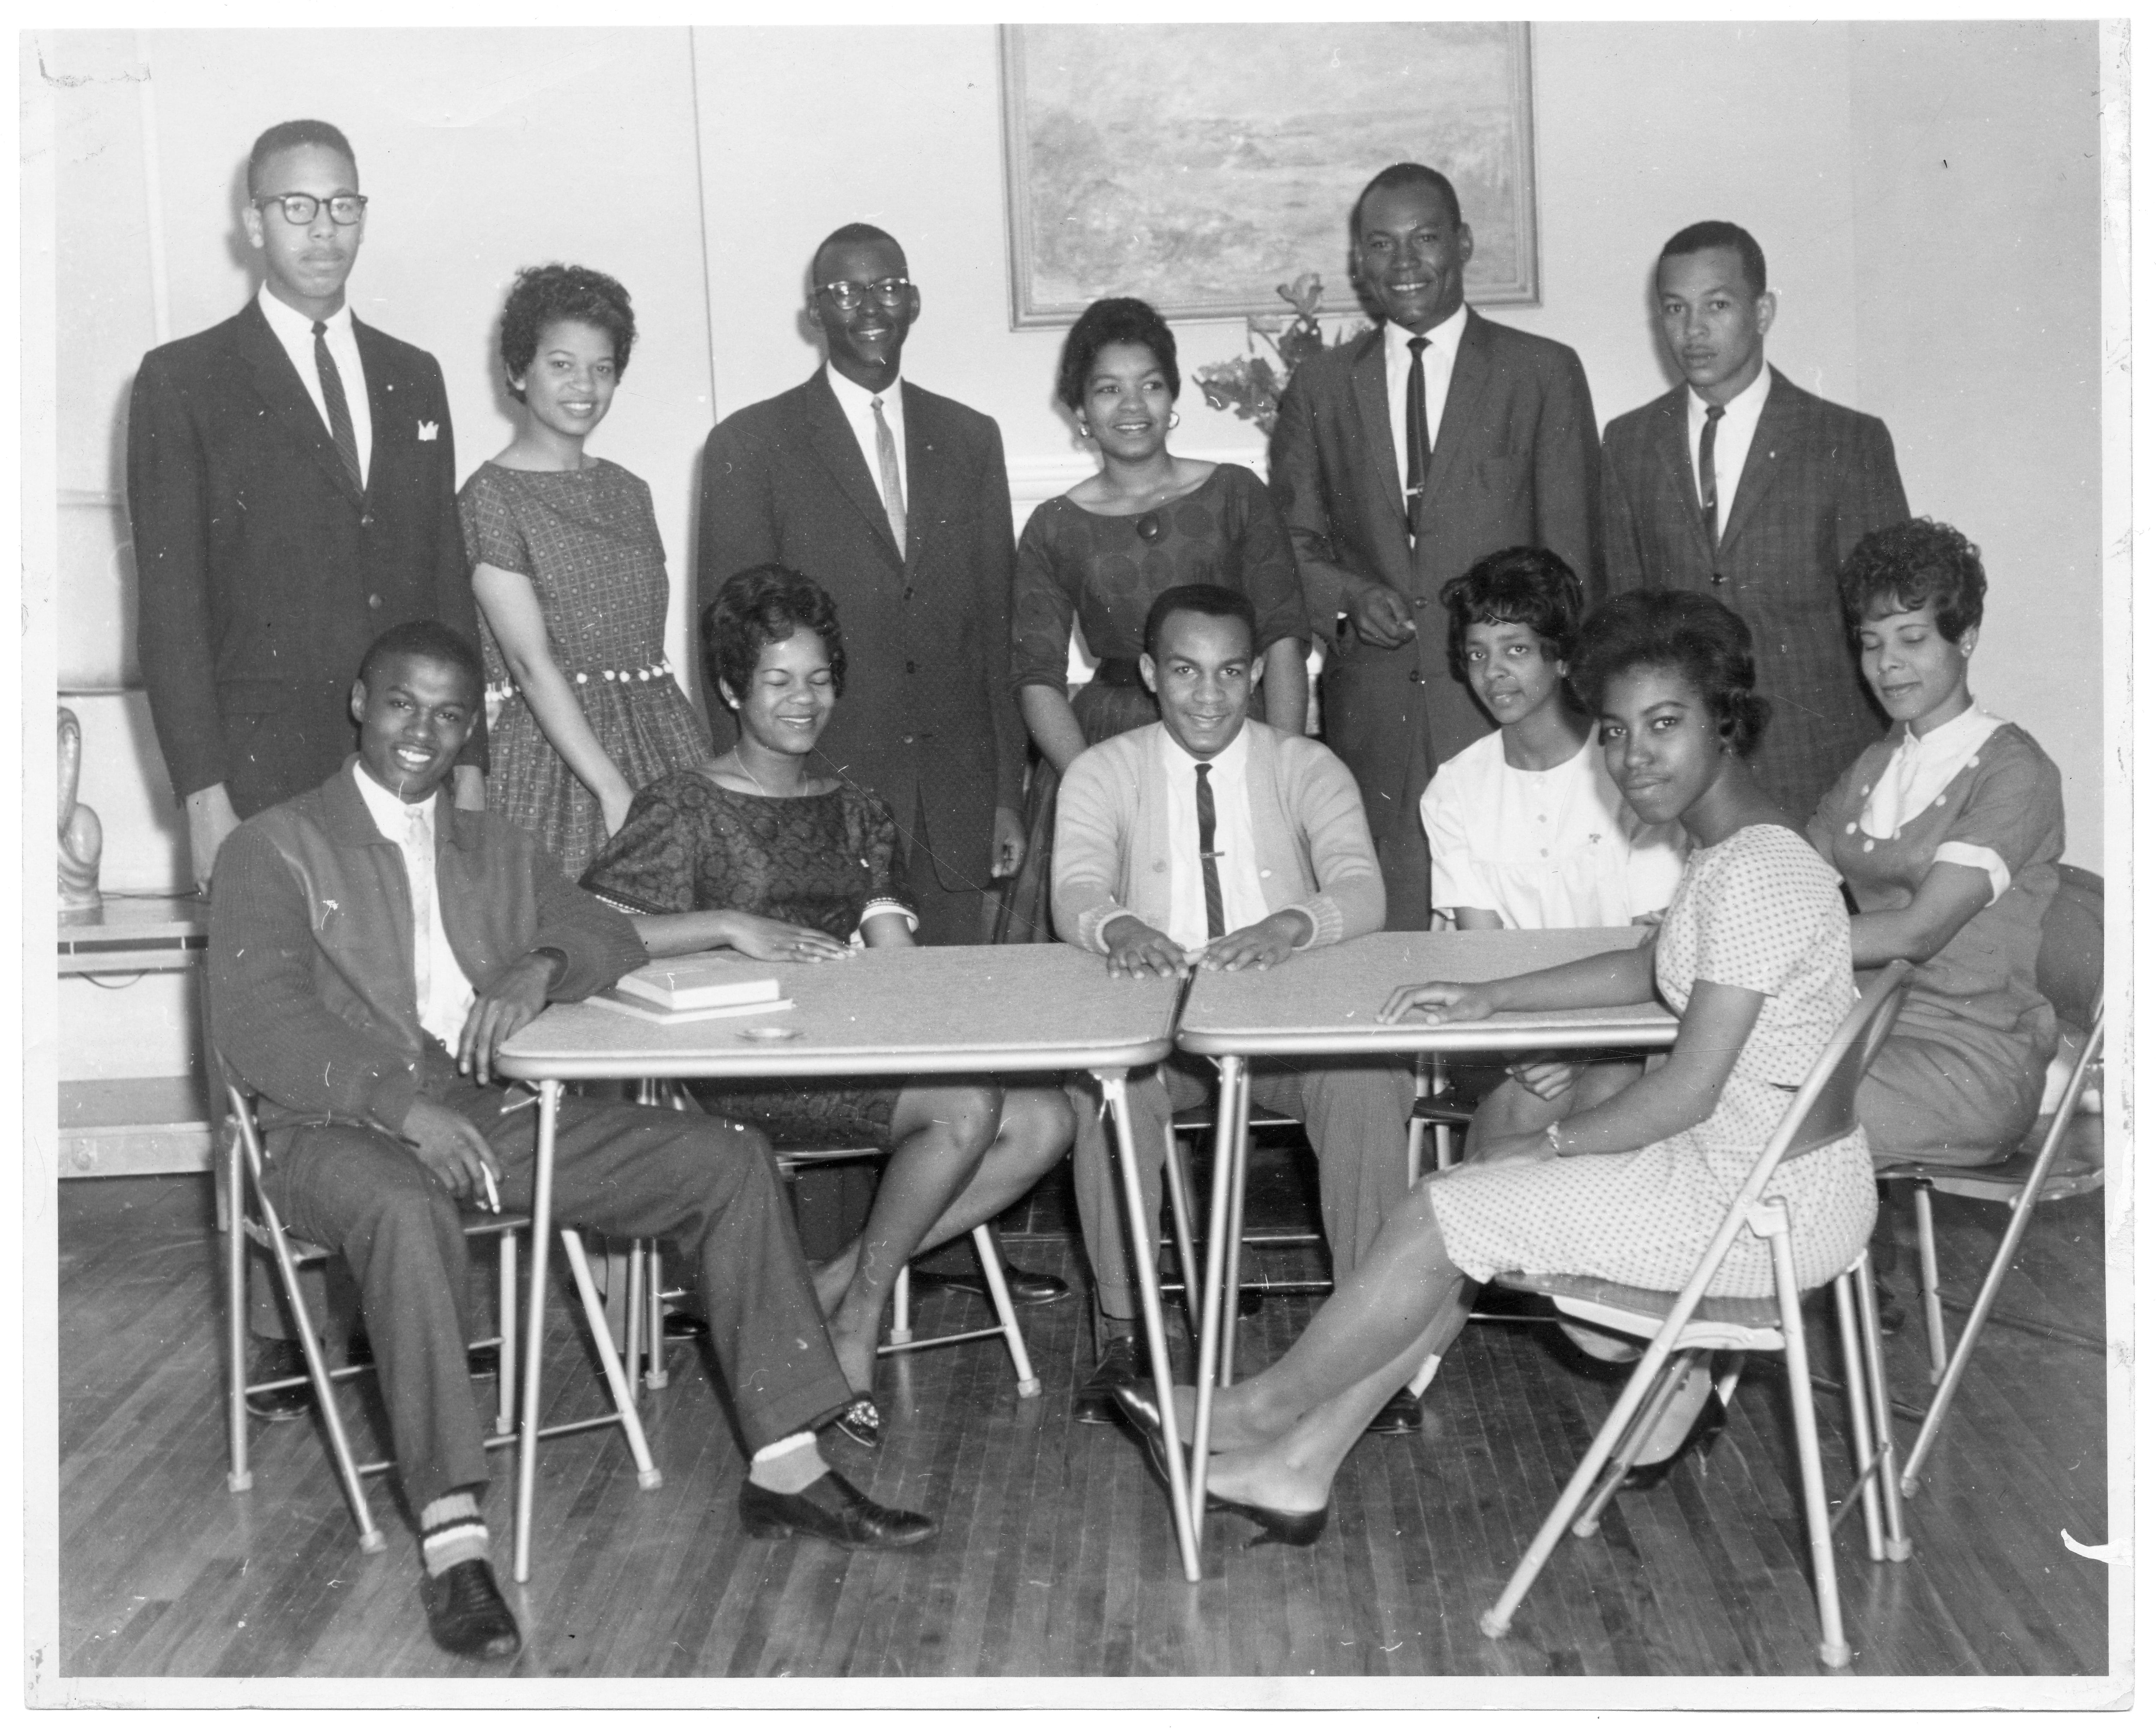 Jerry W. Keahey photographed the Tougaloo Nine shortly before their arrest in 1961 for trying to integrate a whites-only library in Jackson, Miss.